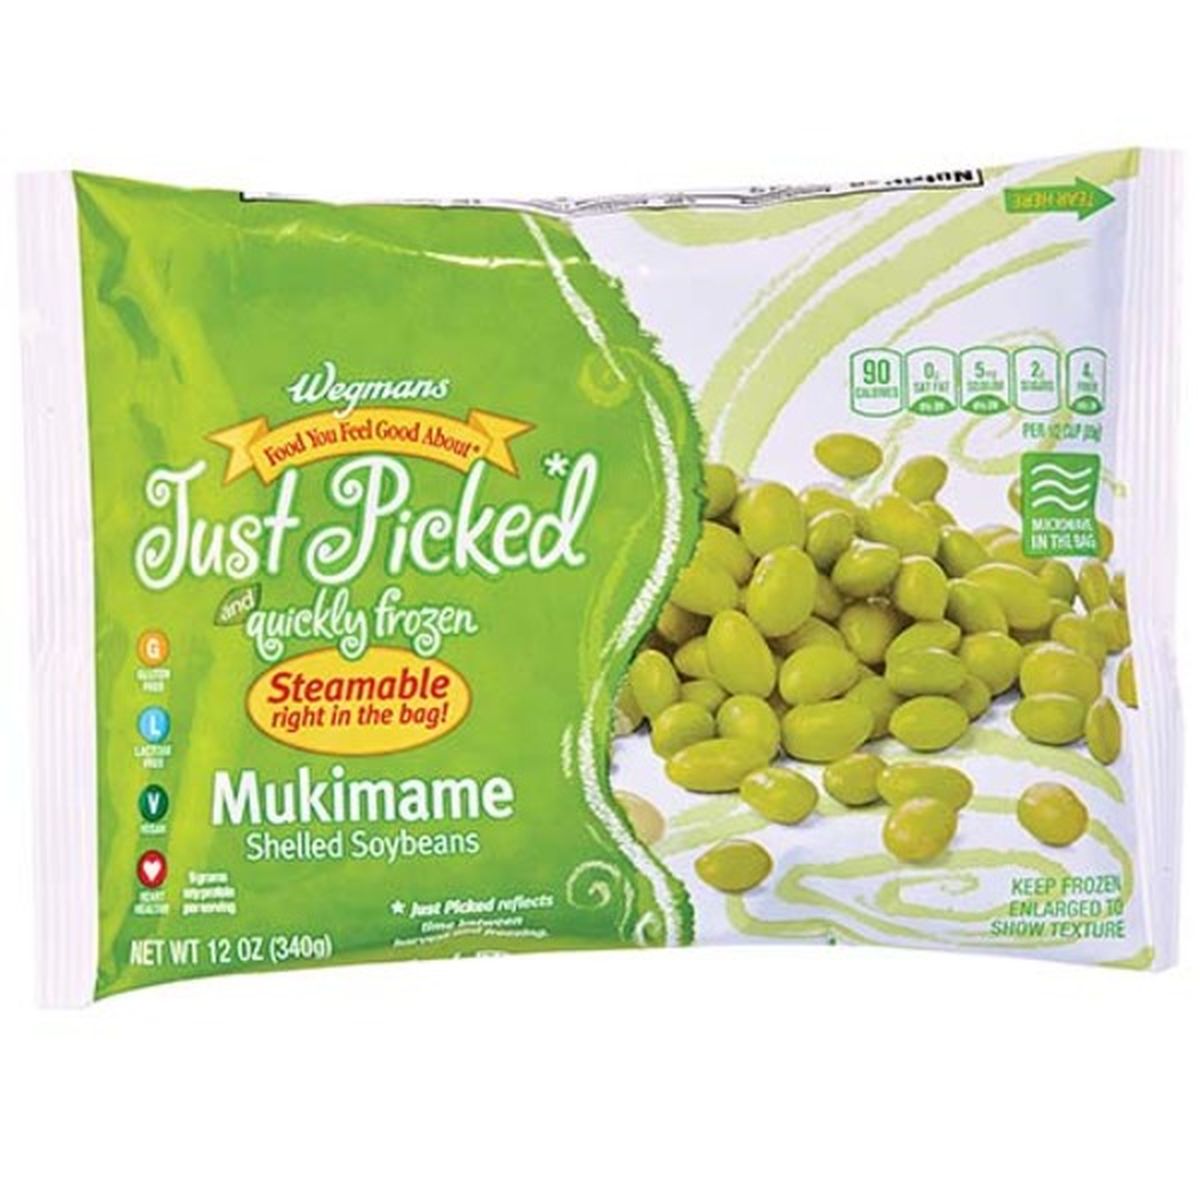 Calories in Wegmans Microwaveable Mukimame Shelled Soybeans